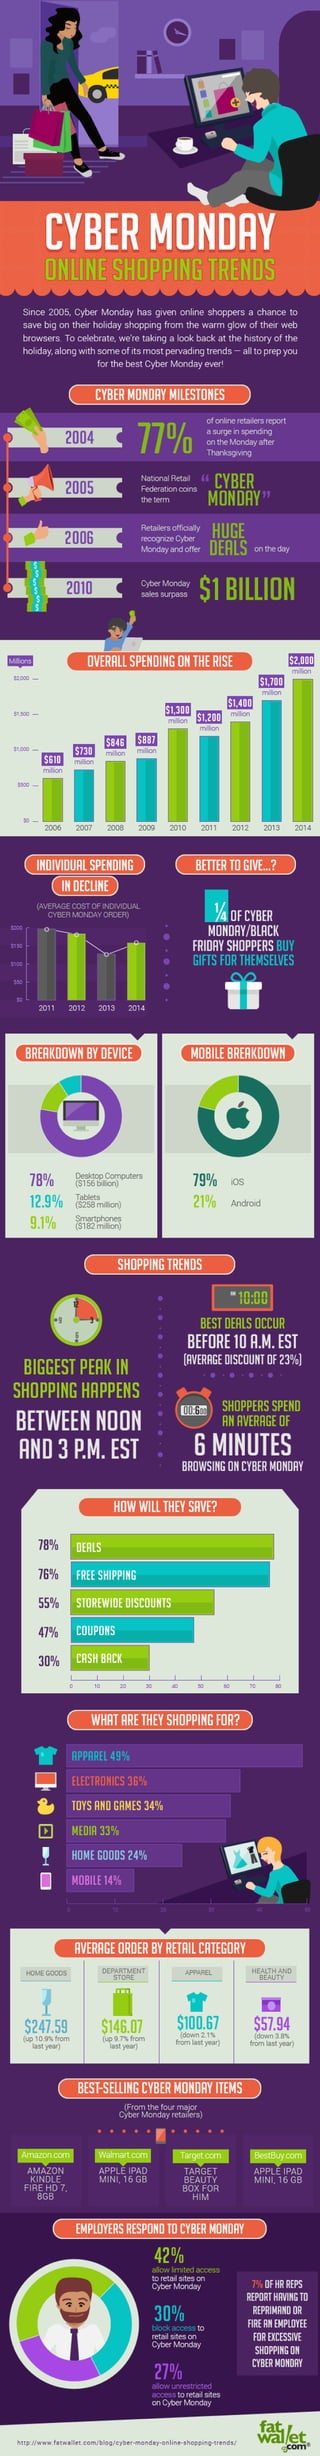 Top Cyber Monday Shopping Trends